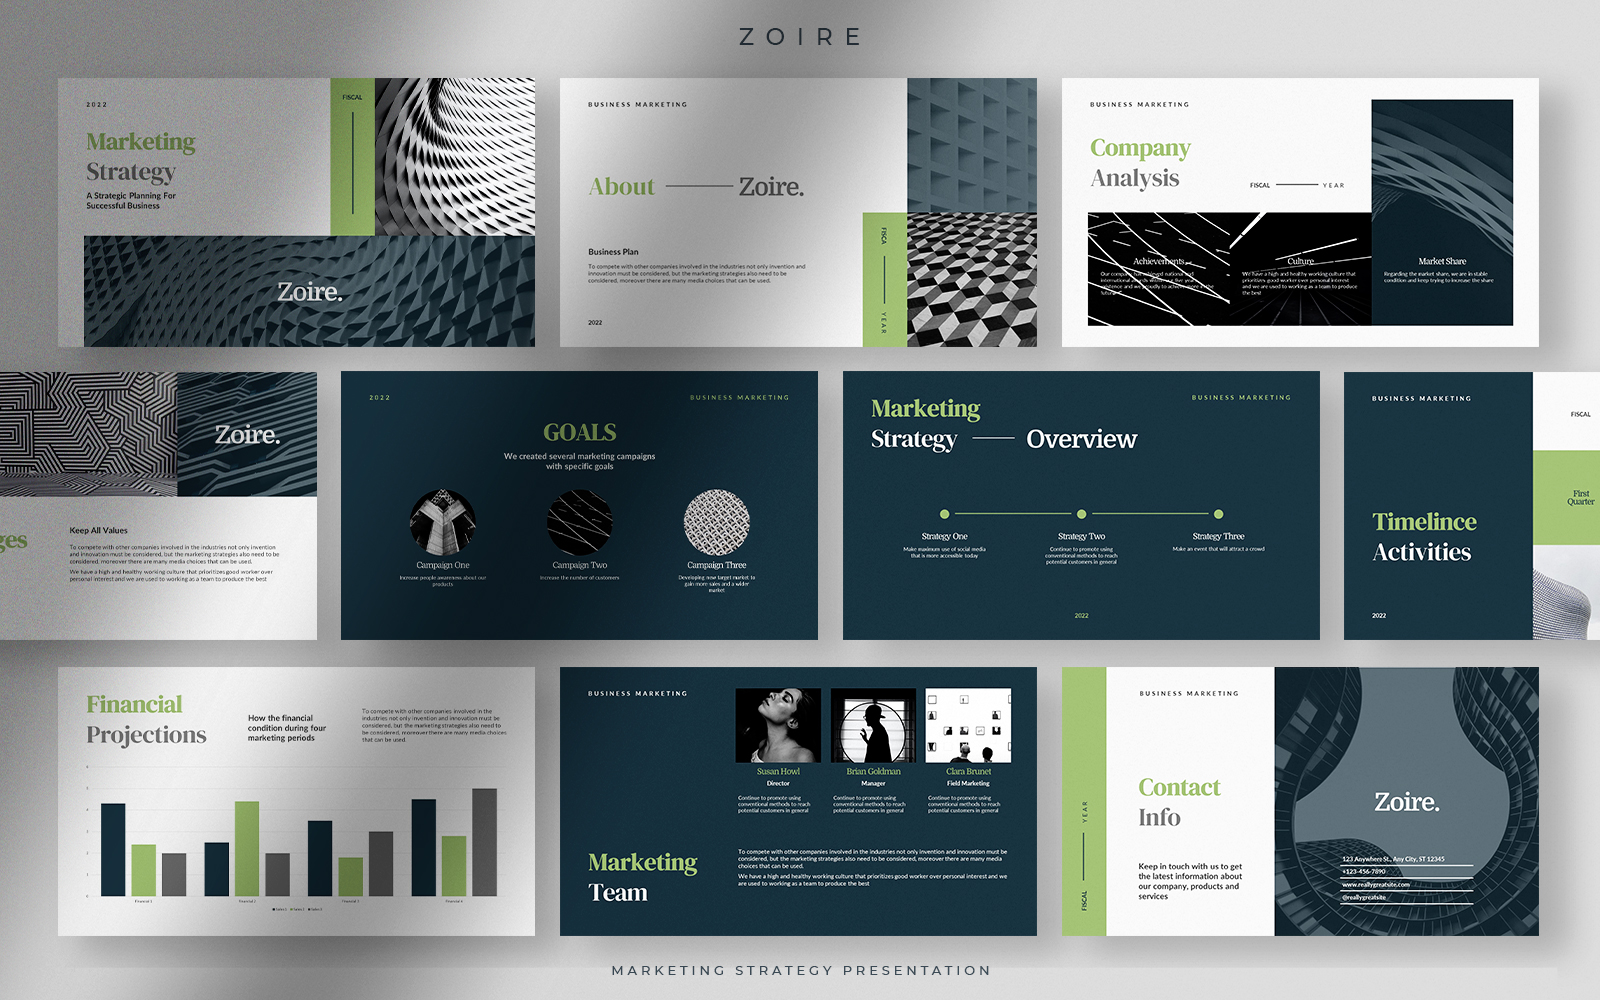 Zoire - Teal Architectural Marketing Strategy Presentation Template